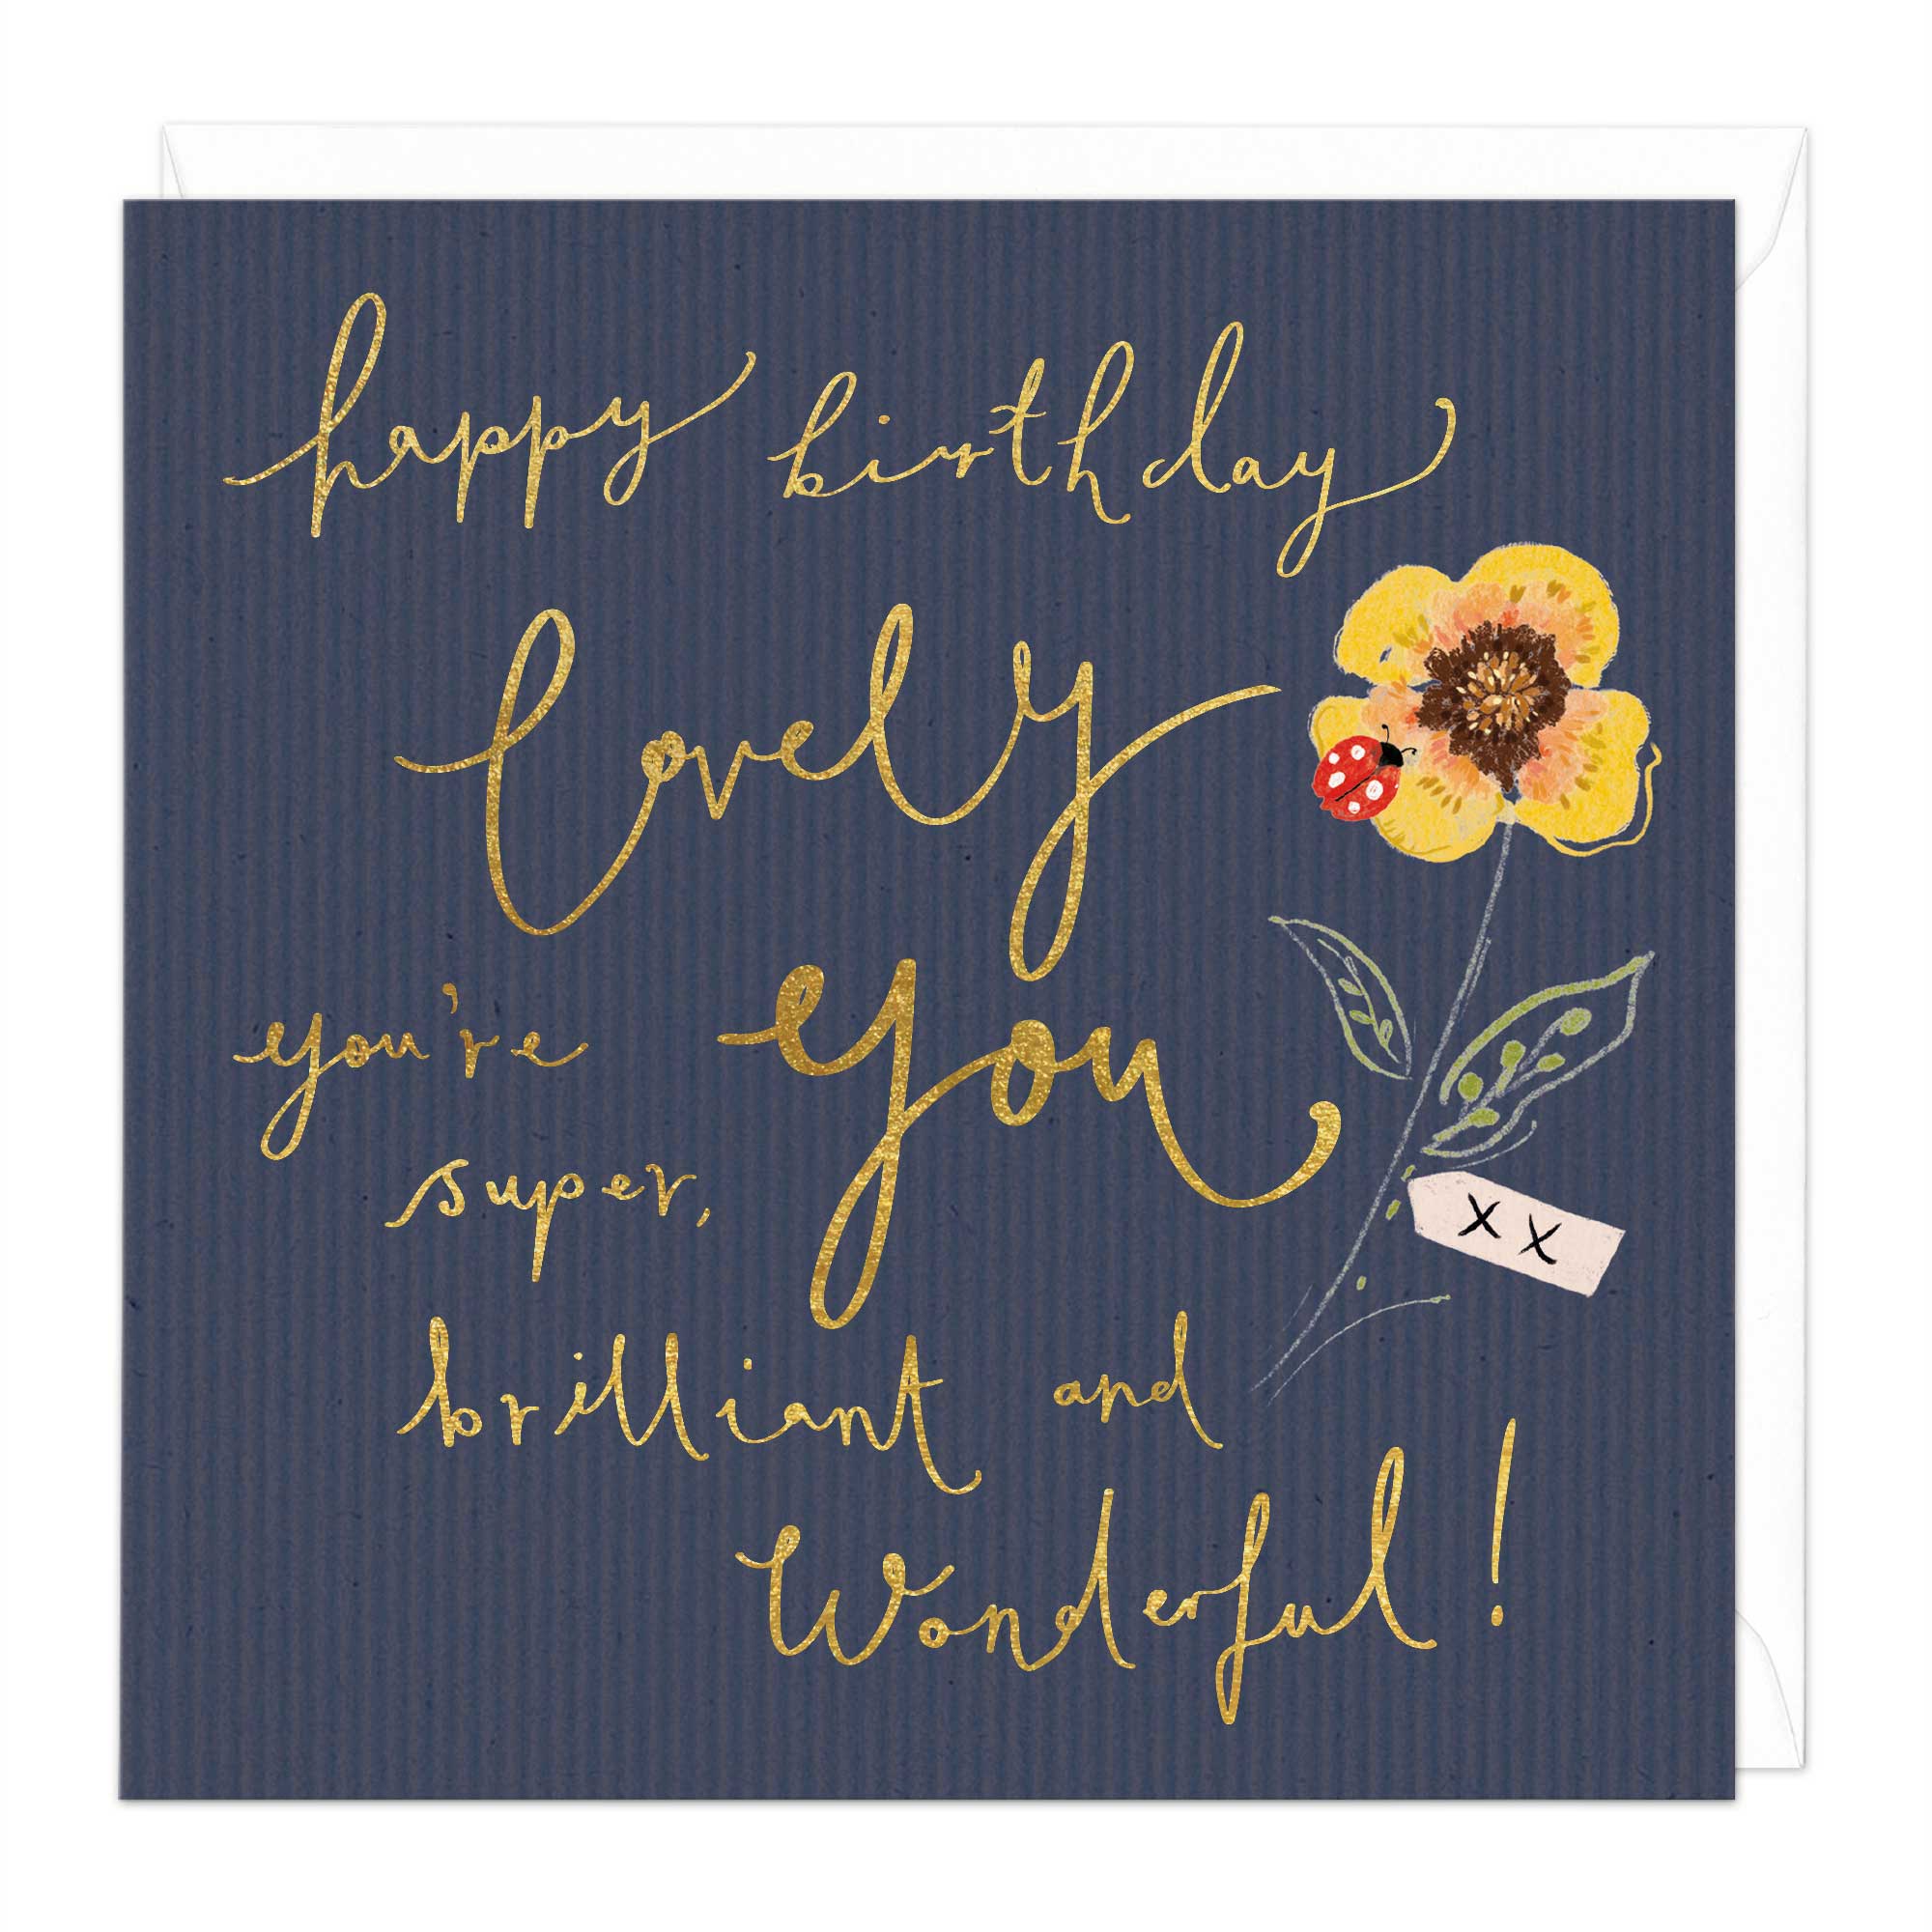 Super, Brilliant Lovely You Birthday Card